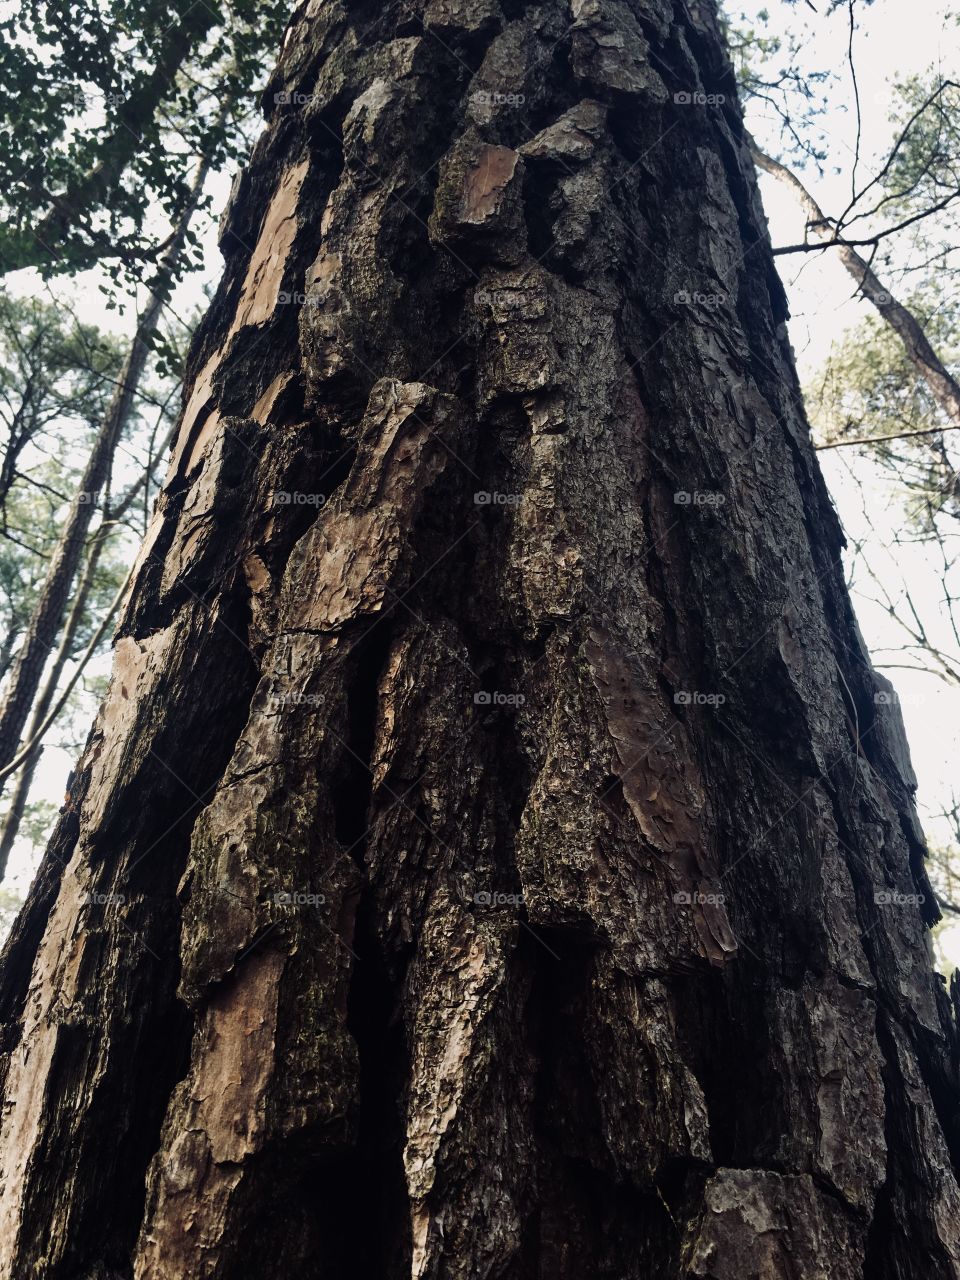 Closeup of the rough bark of s longleaf pine tree in the forest 